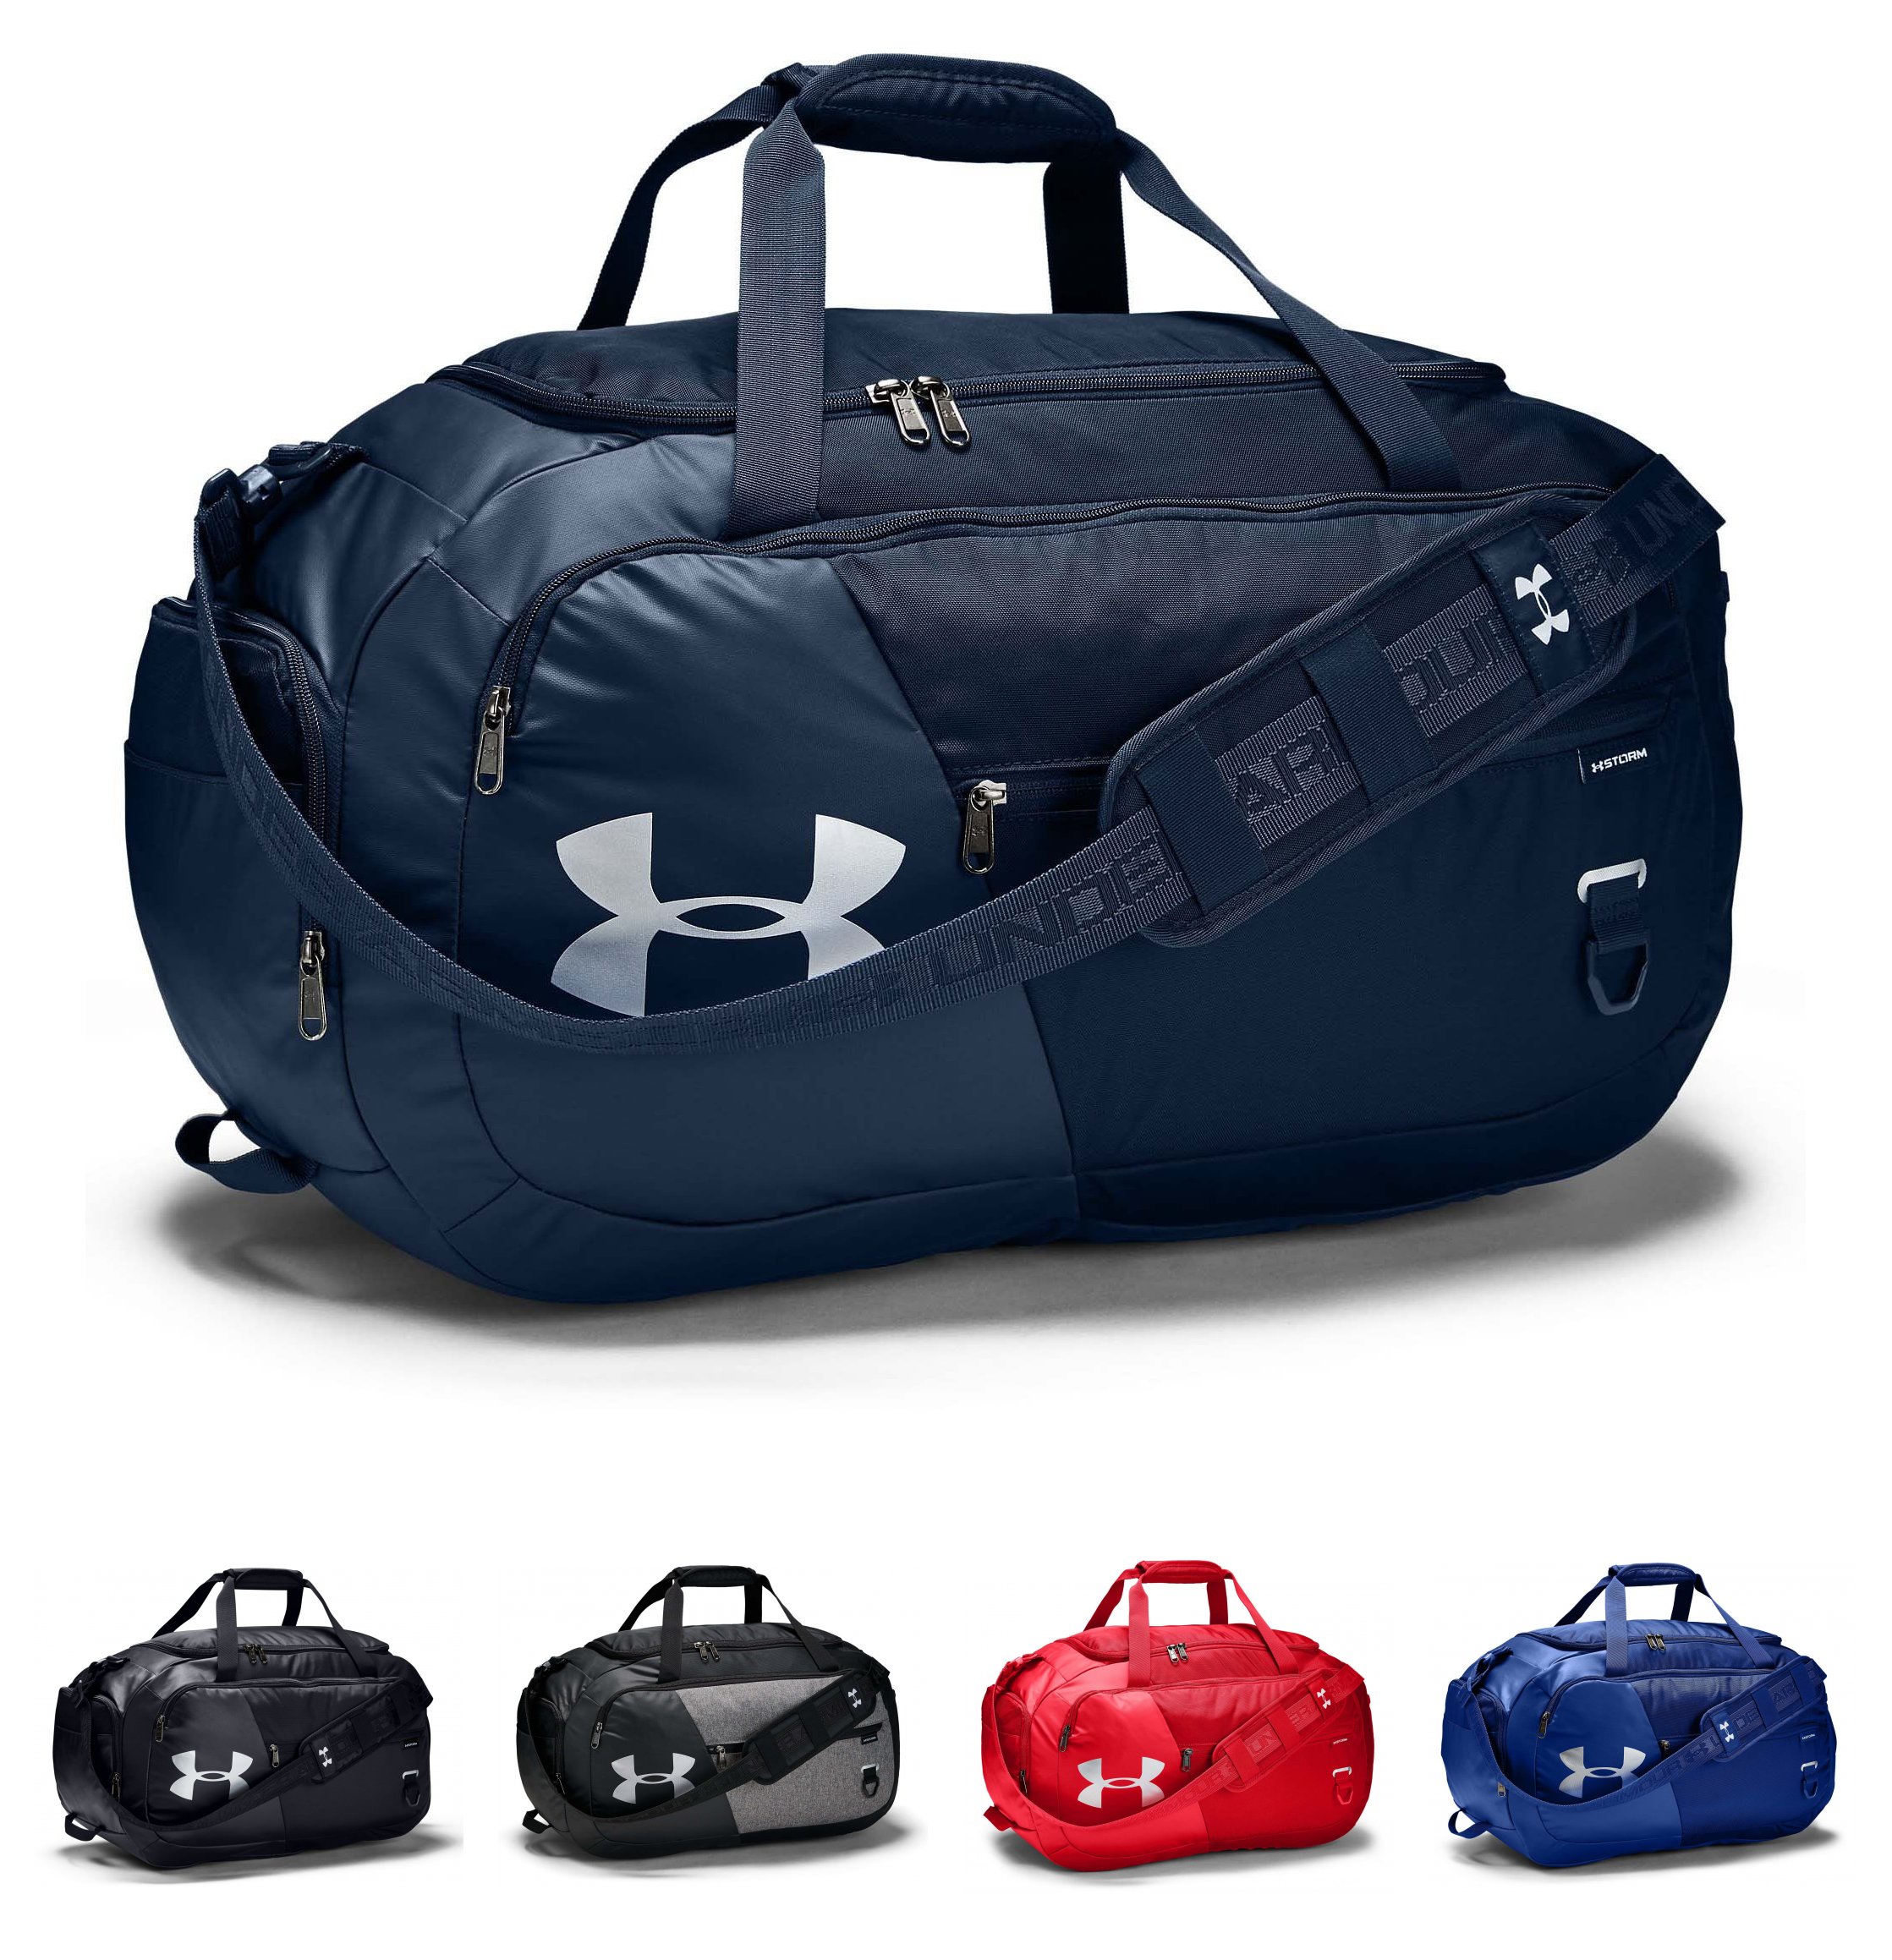 Under Undeniable Medium Duffle Bags | Free Shipping over $49!